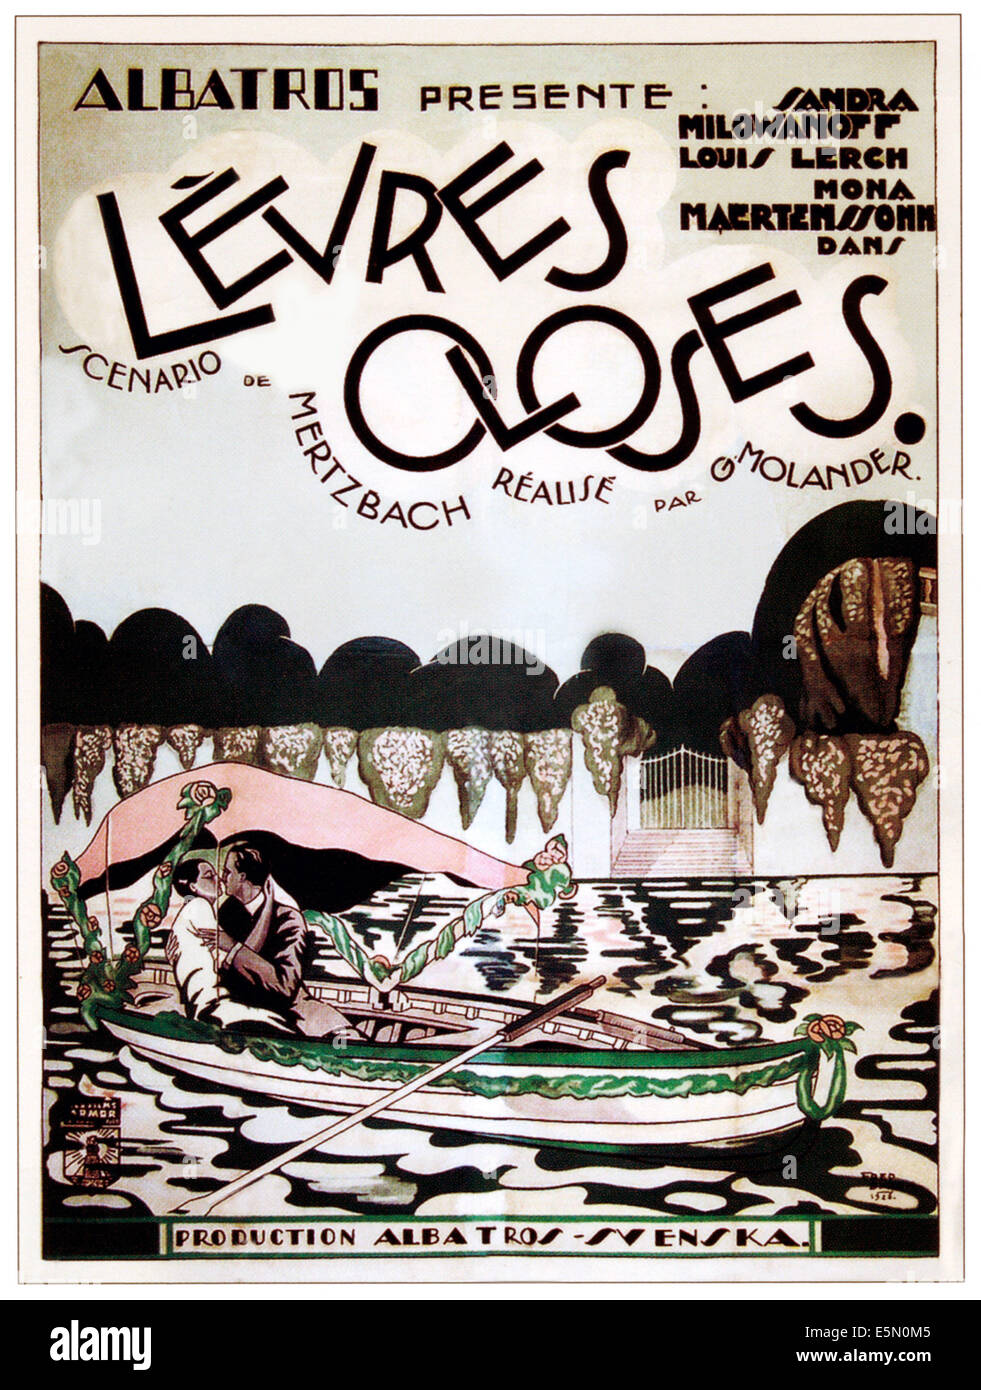 FORSEGLADE LAPPAR (aka LEVRES CLOSES), French poster art, 1928. Stock Photo